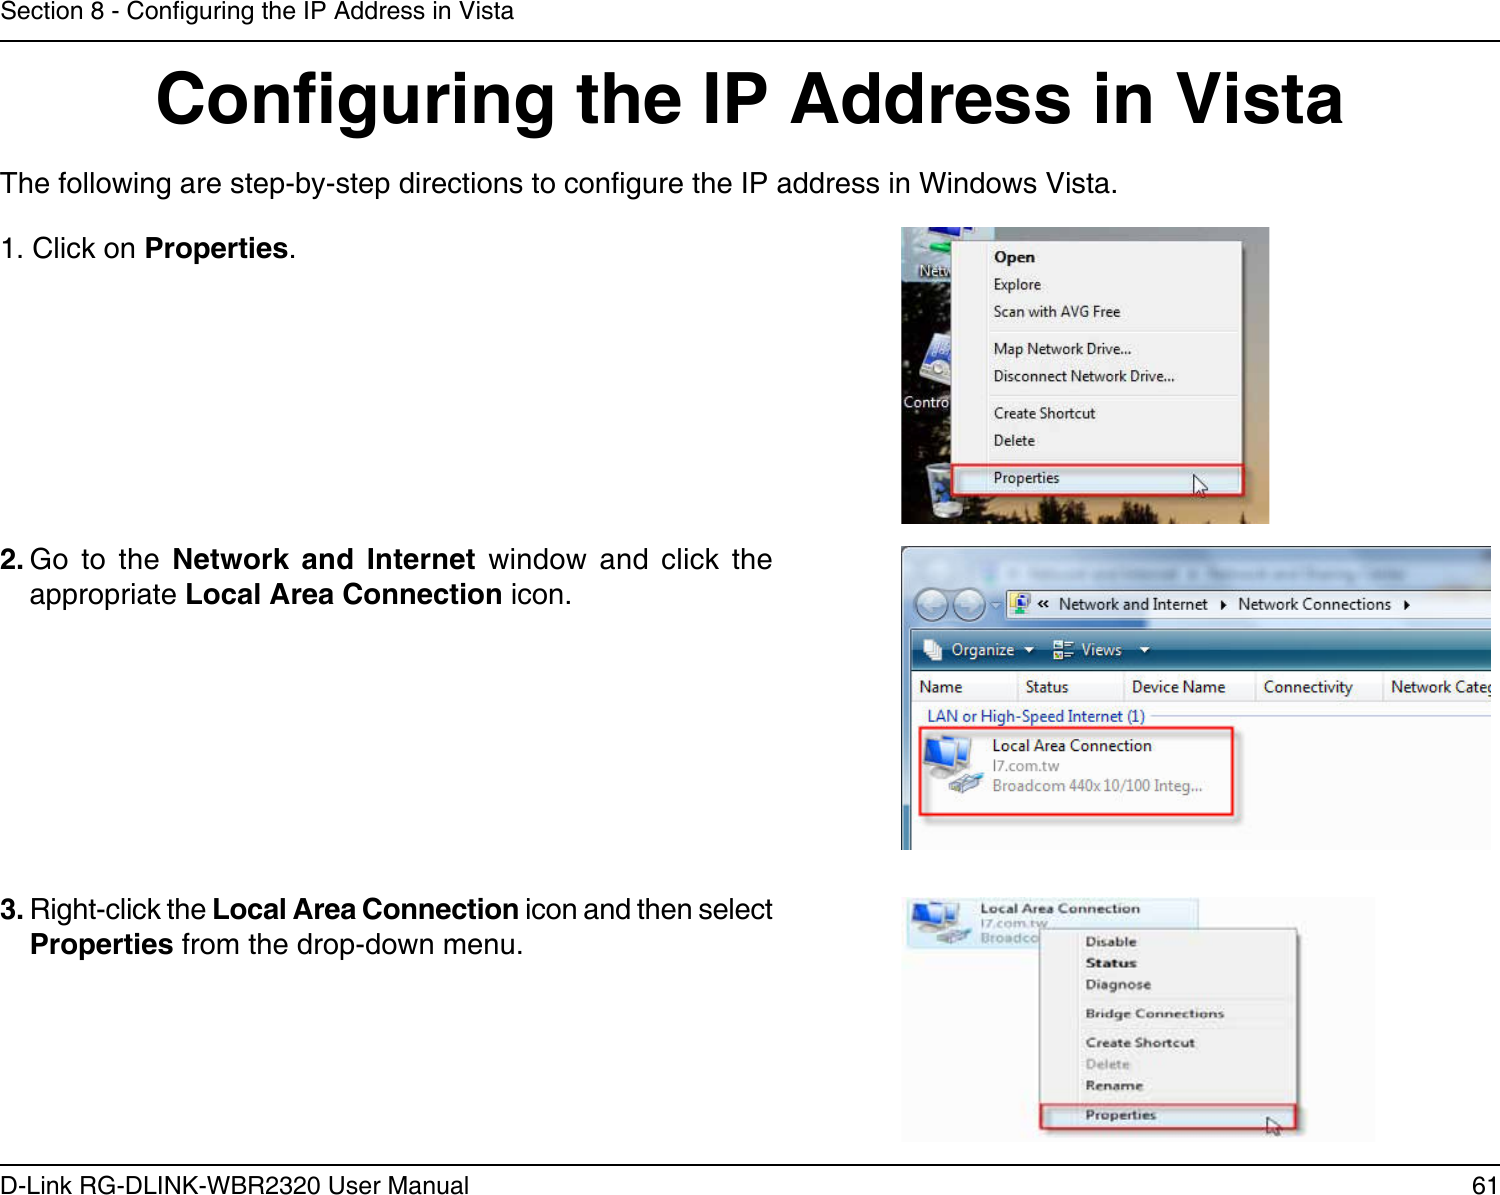 61D-Link RG-DLINK-WBR2320 User ManualSection 8 - Conguring the IP Address in VistaConguring the IP Address in VistaThe following are step-by-step directions to congure the IP address in Windows Vista.    2. Go  to  the  Network  and  Internet  window  and  click  the appropriate Local Area Connection icon. 1. Click on Properties.     3. Right-click the Local Area Connection icon and then select Properties from the drop-down menu. 